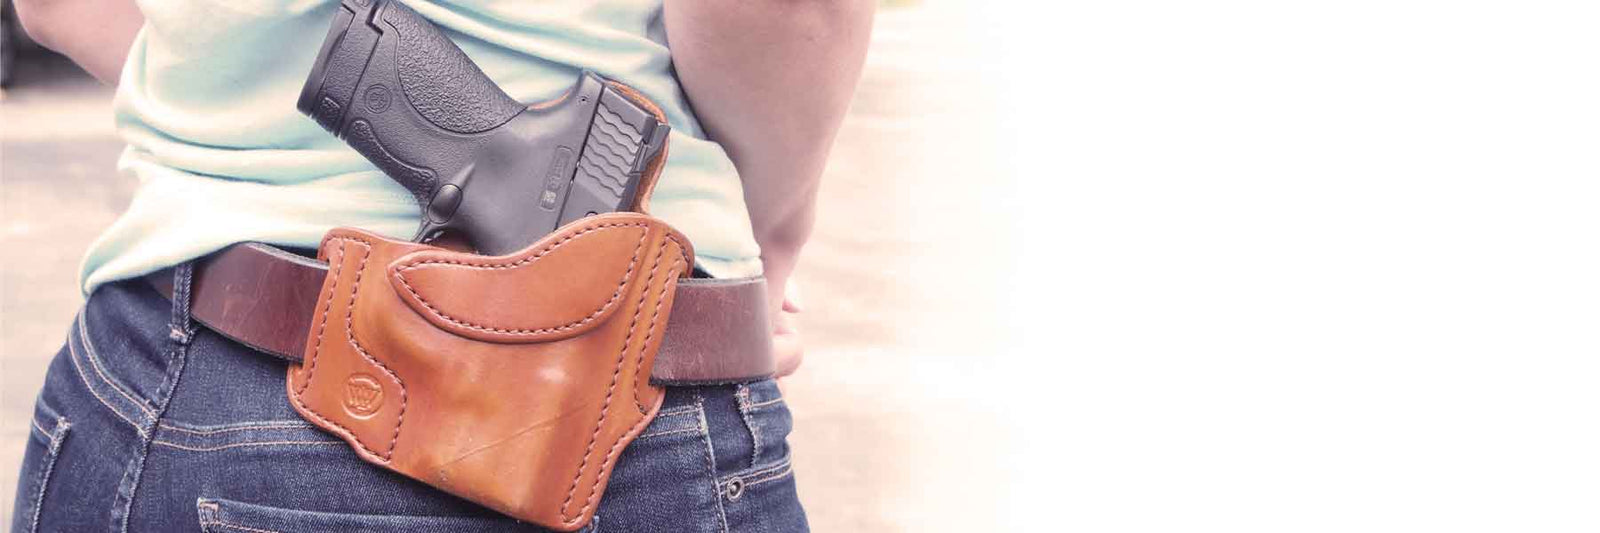 Concealed Carry Holsters and More for Women from SHOT Show 2023